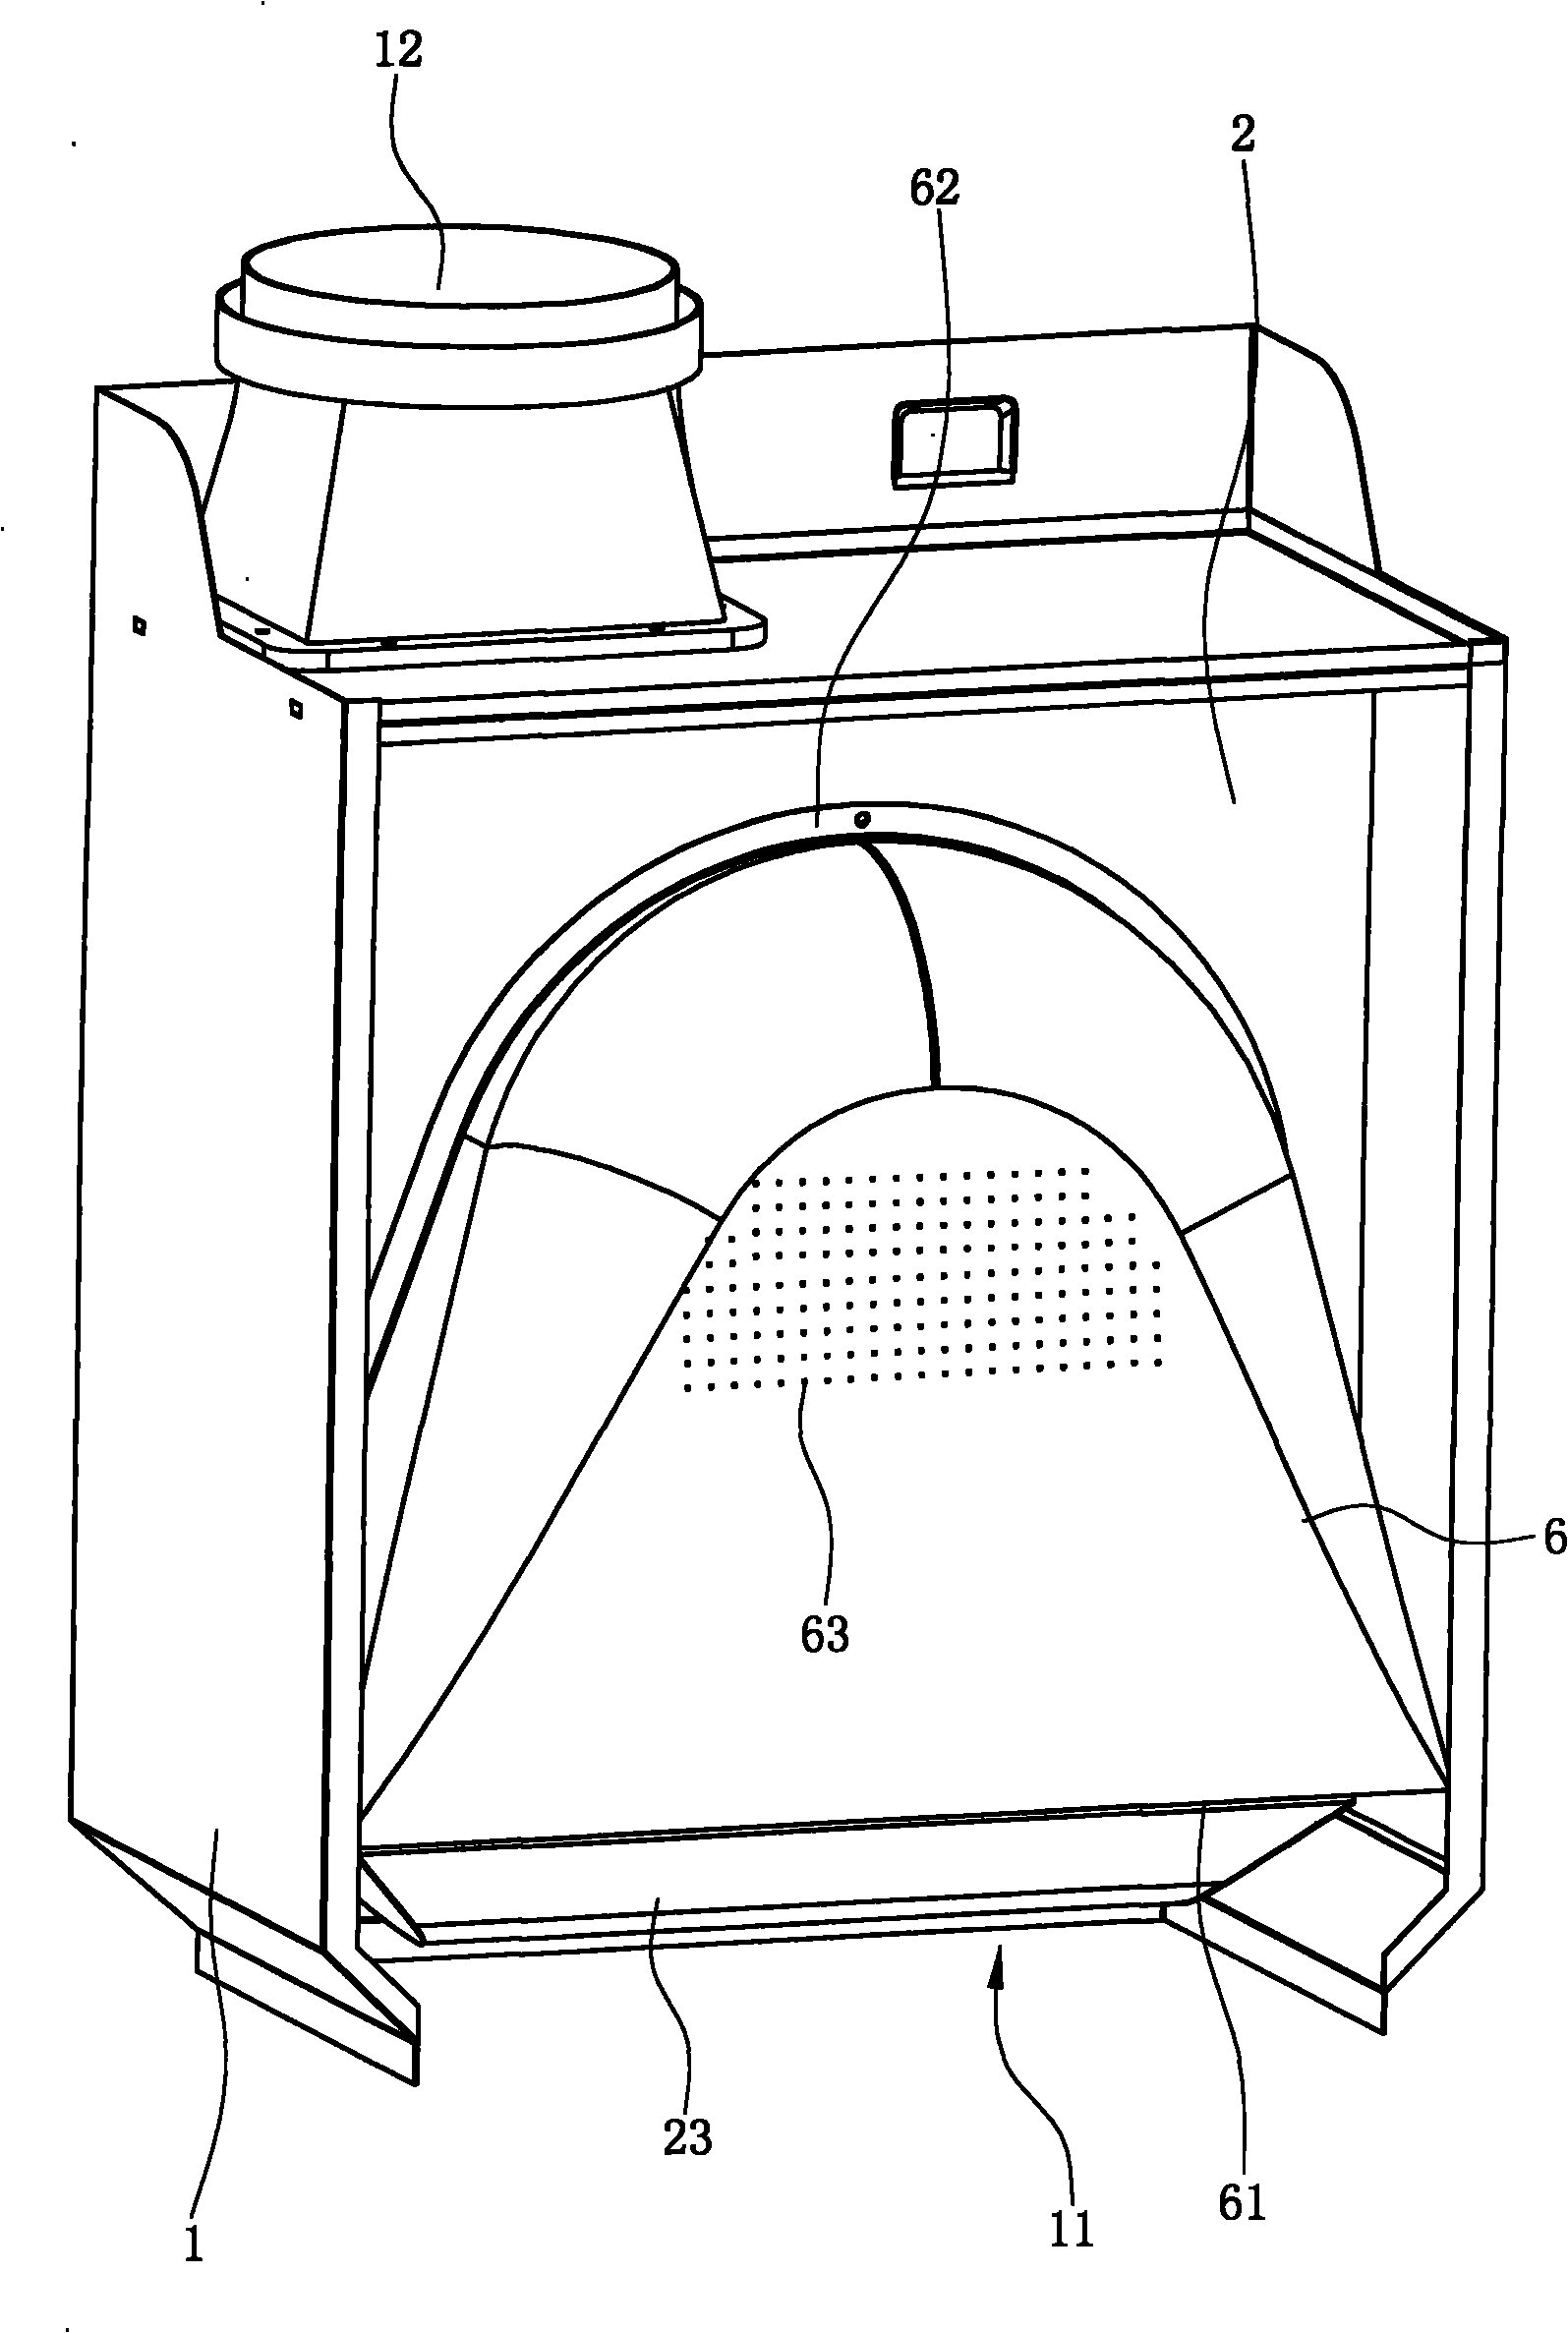 Range hood with flow-stabilizing and noise-reducing structure